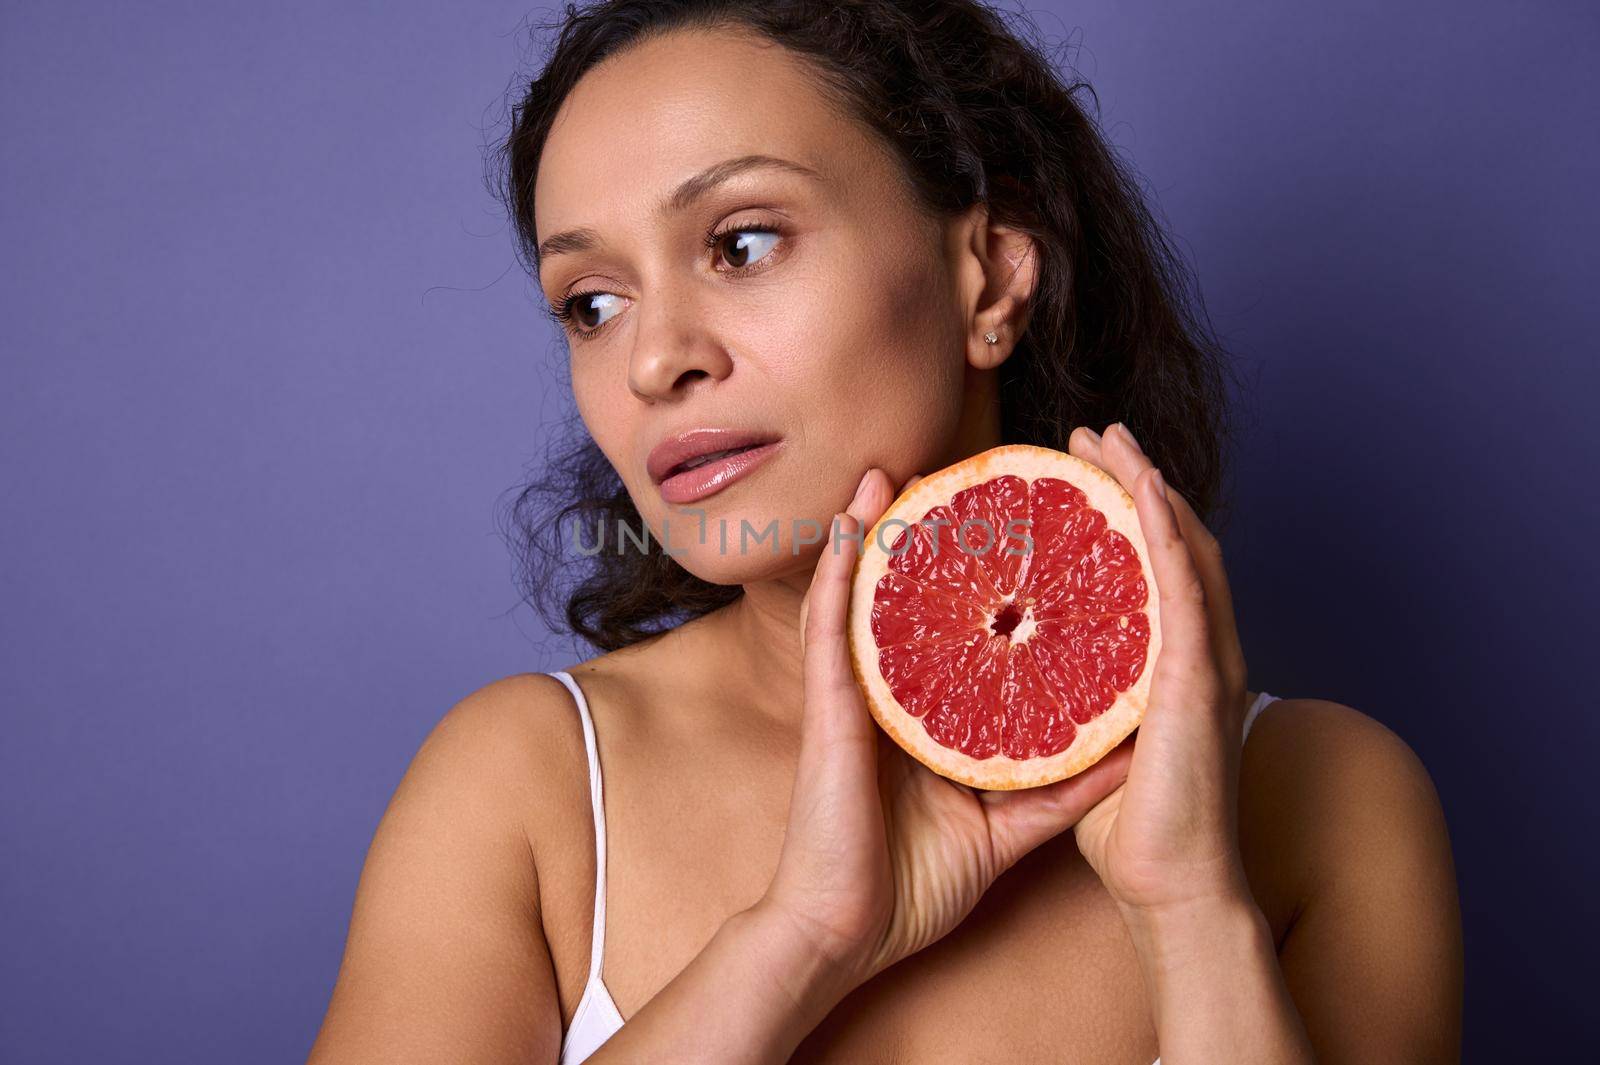 Close-up. Beautiful dark-haired woman with a half of red fresh juicy grapefruit near her face, looking away isolated over purple background with copy ad space. Health, body and skin care concept by artgf